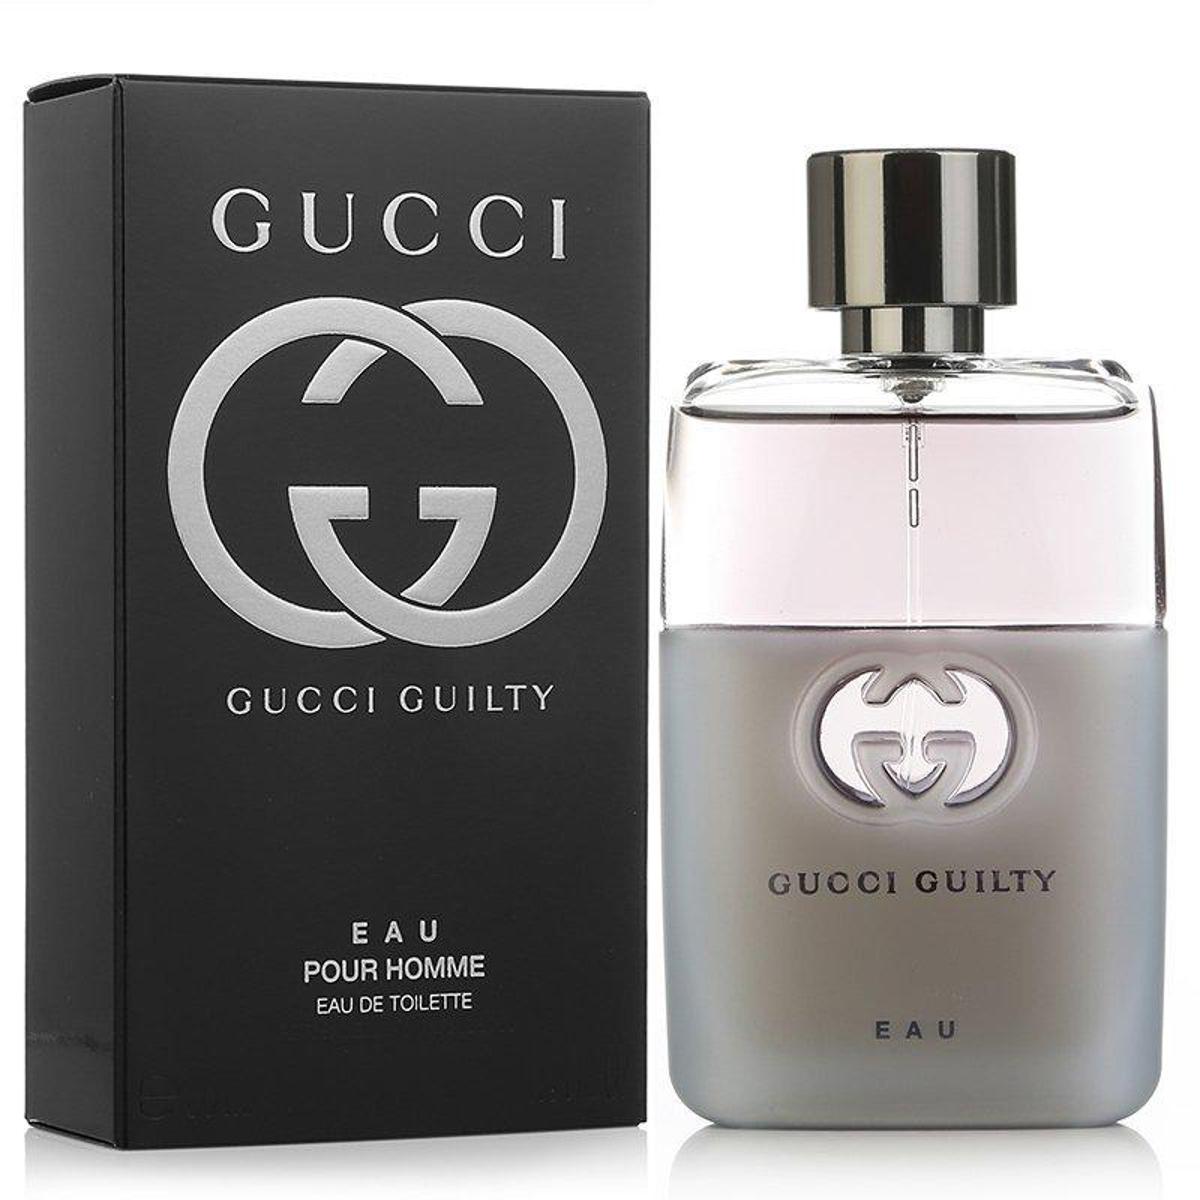 Gucci Guilty Pour Homme Perfume 90ml Price in Pakistan